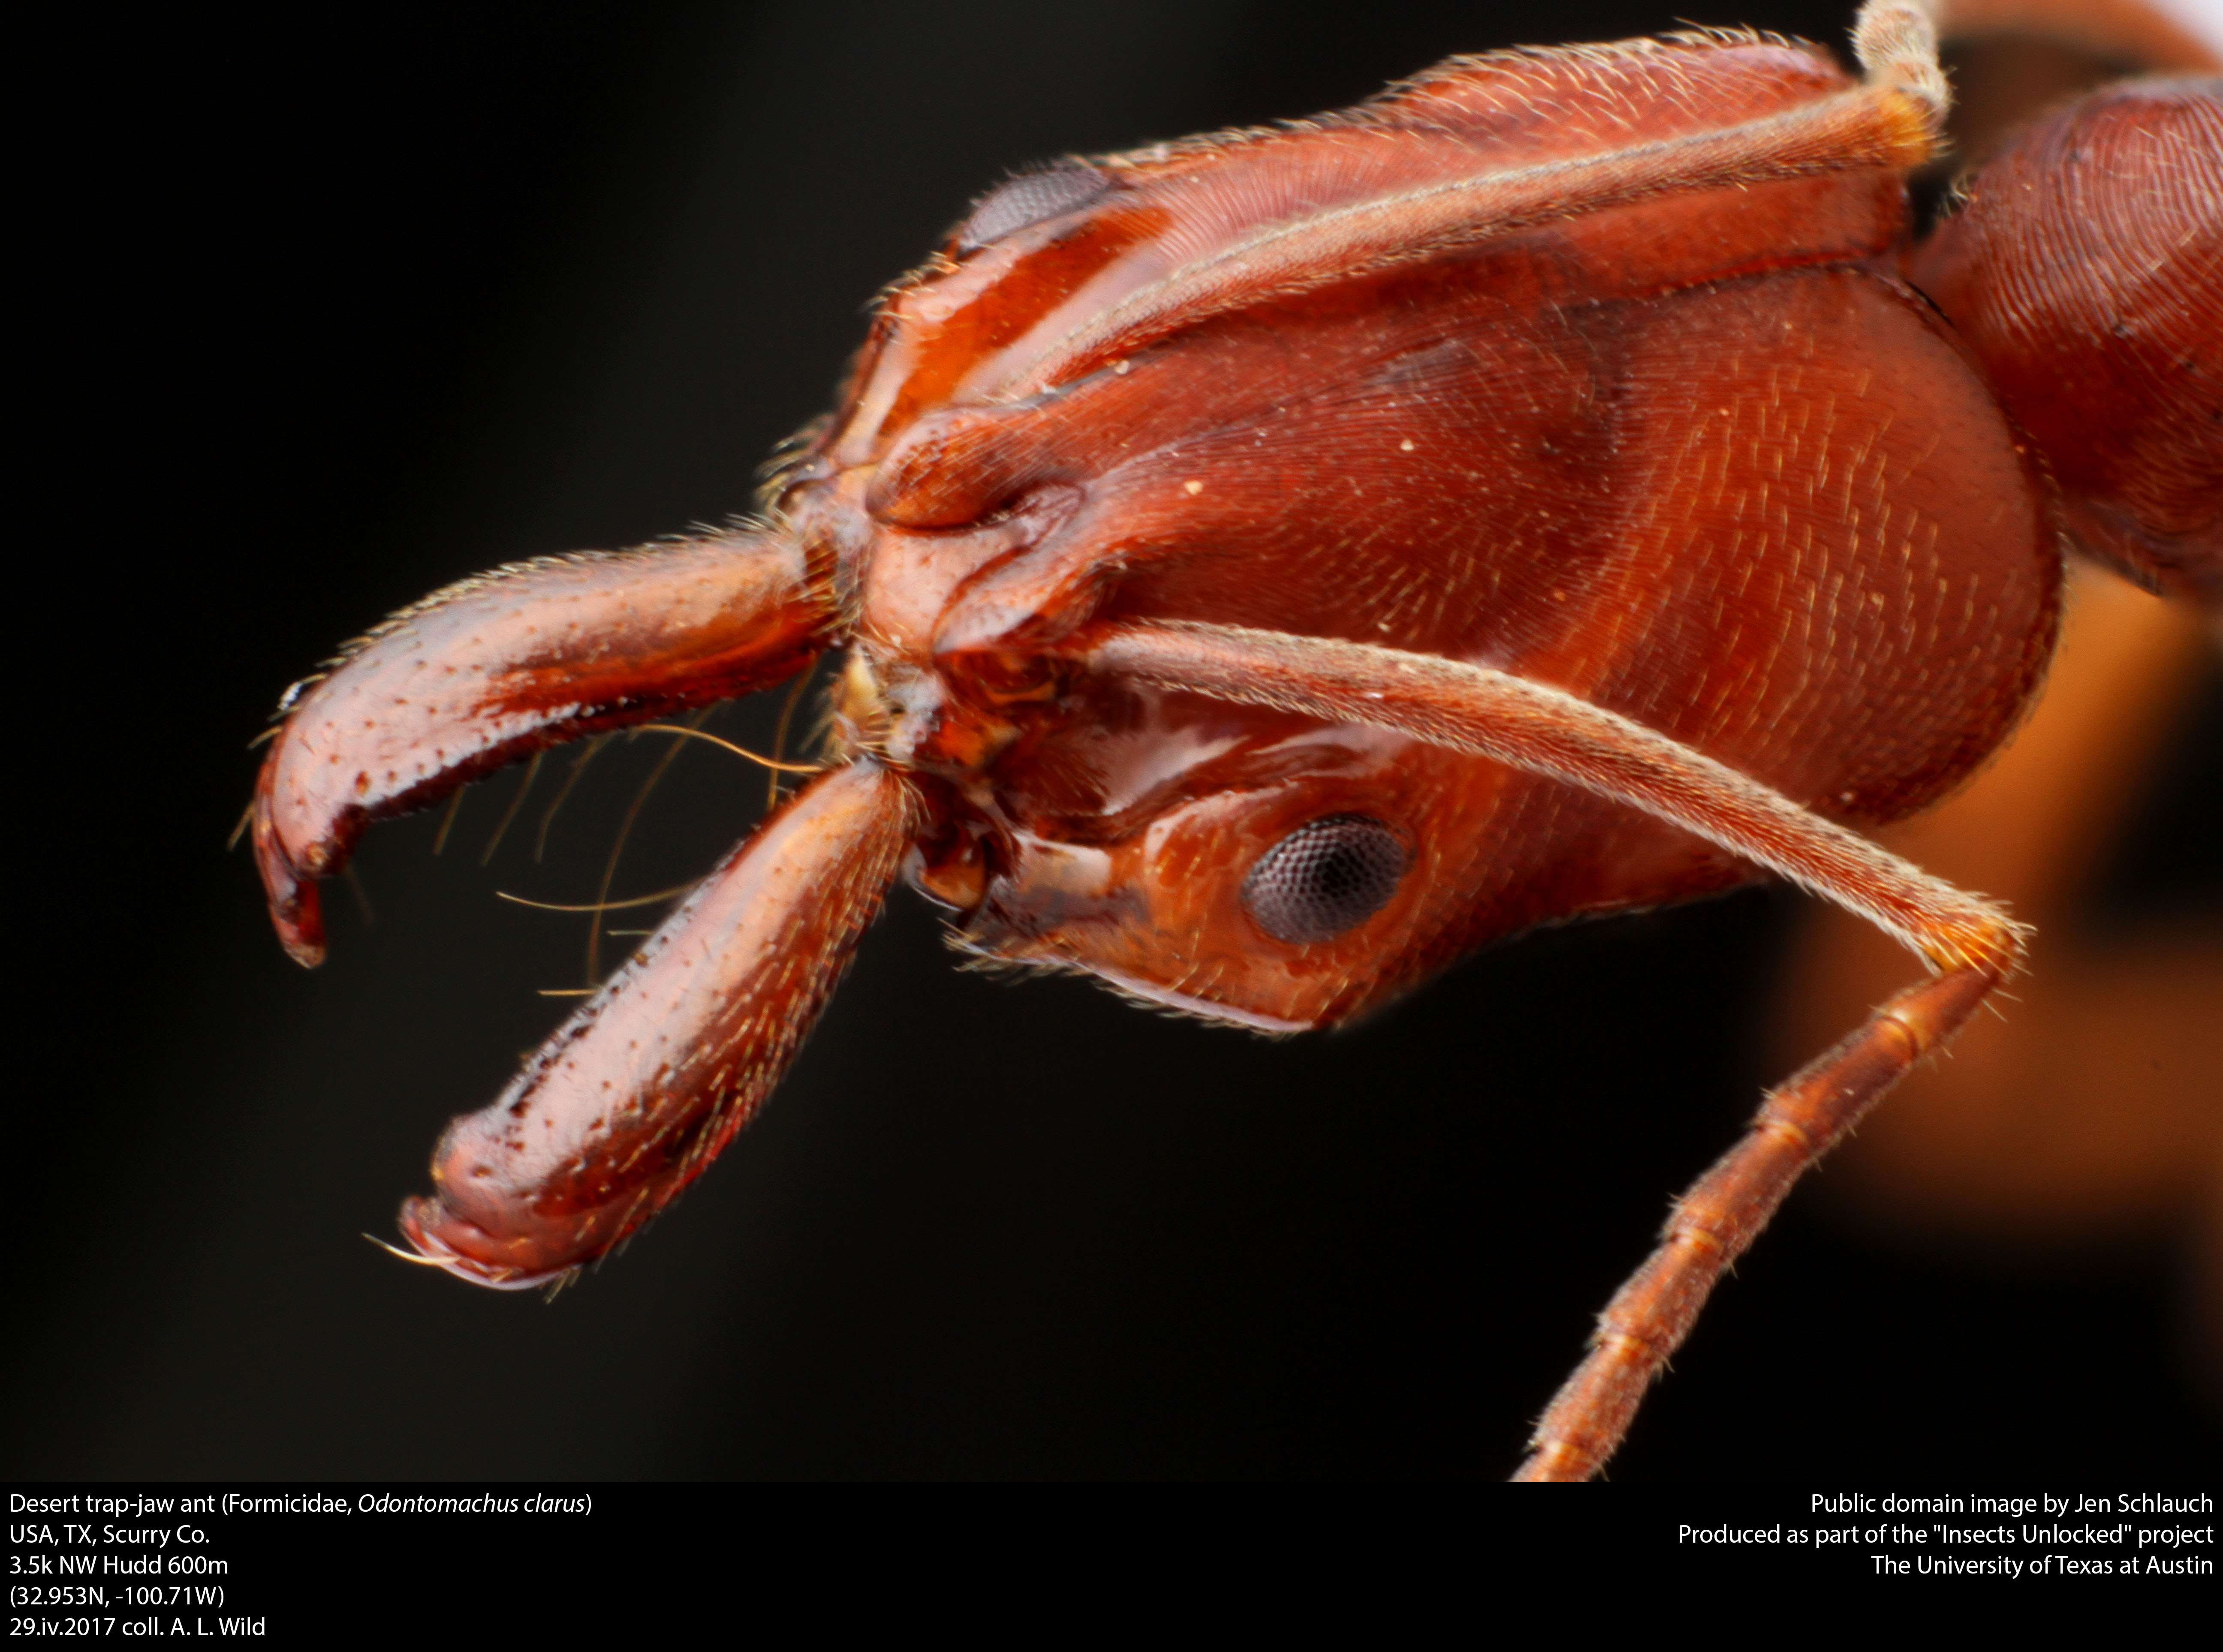 Desert trap-jaw ant (formicidae, odontomachus clarus) photo